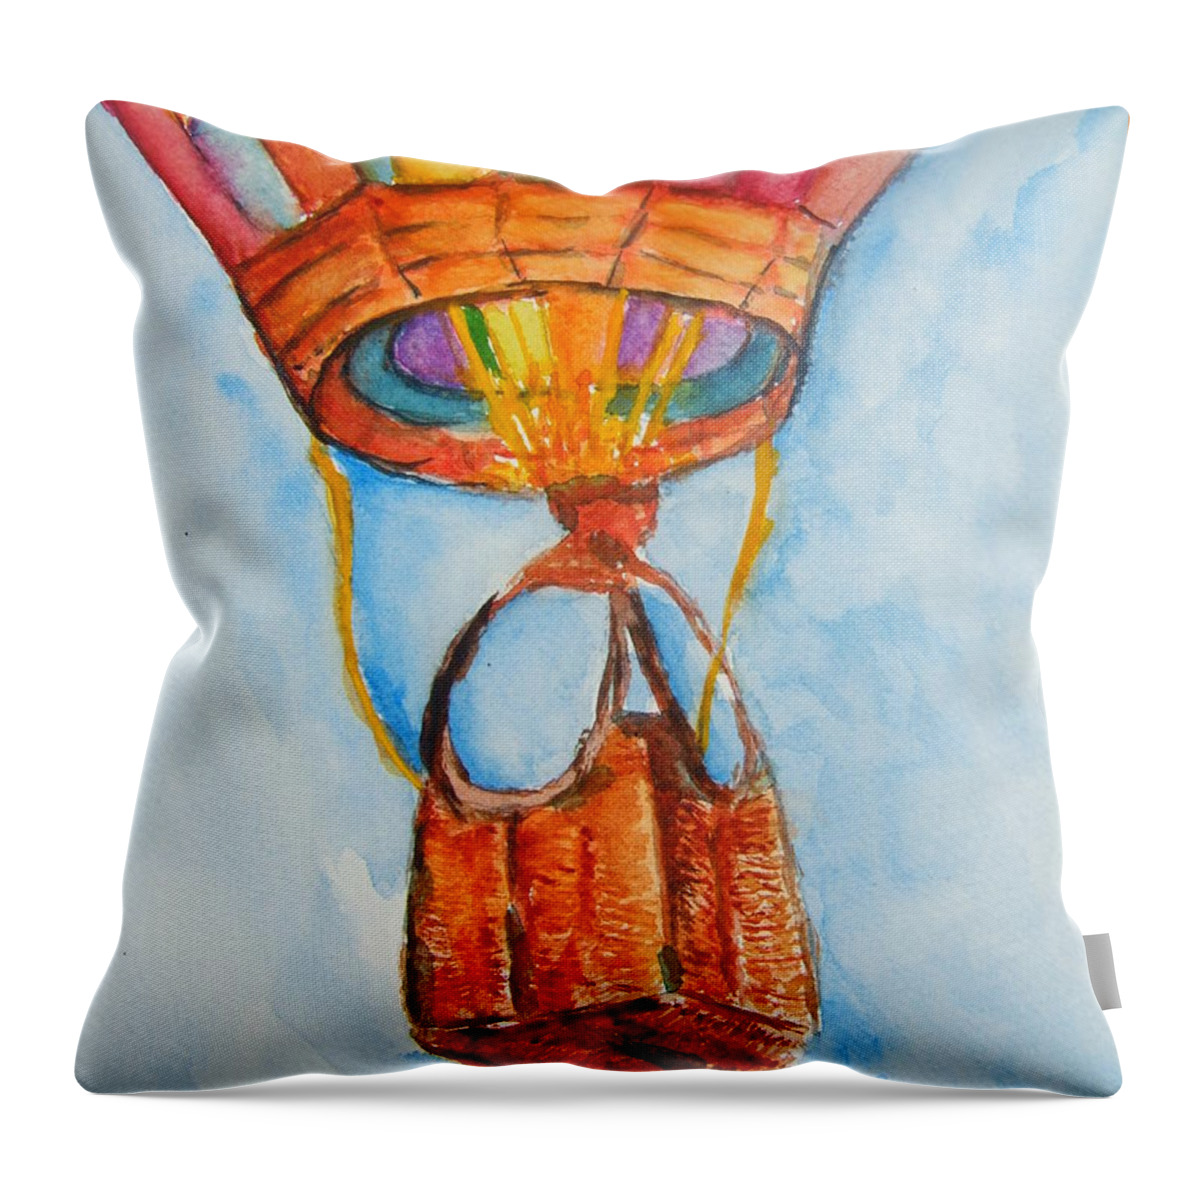 Fly Throw Pillow featuring the painting Gentle Flight by Elaine Duras